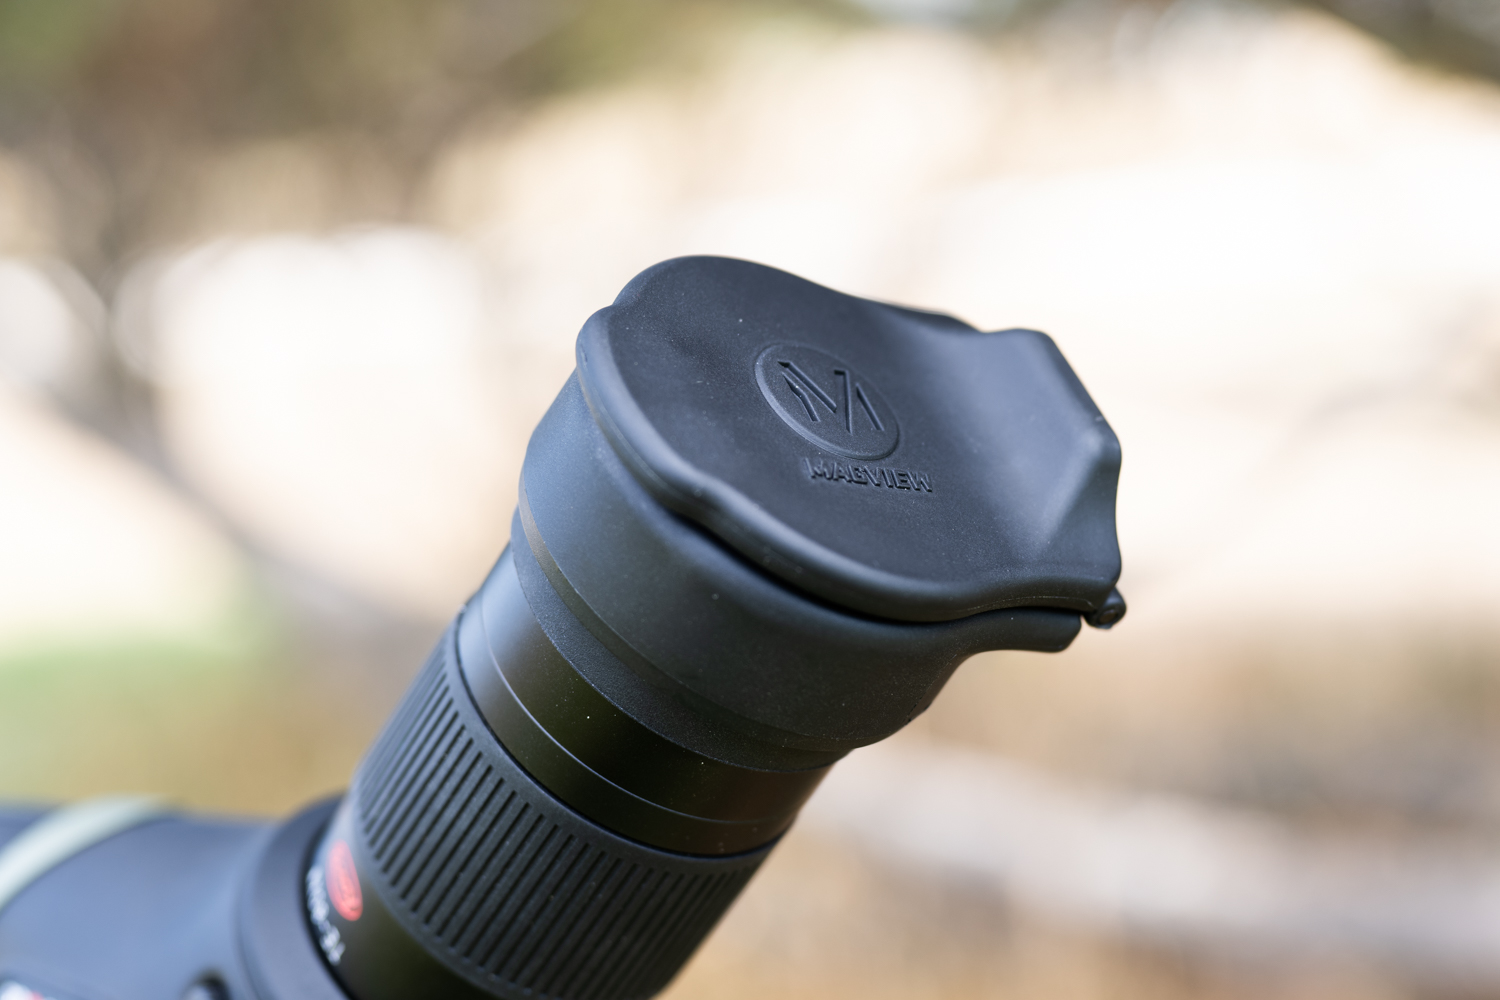 The Magview hinged cap does double duty protecting the eyepiece and folding out to hold the phone case magnetically.